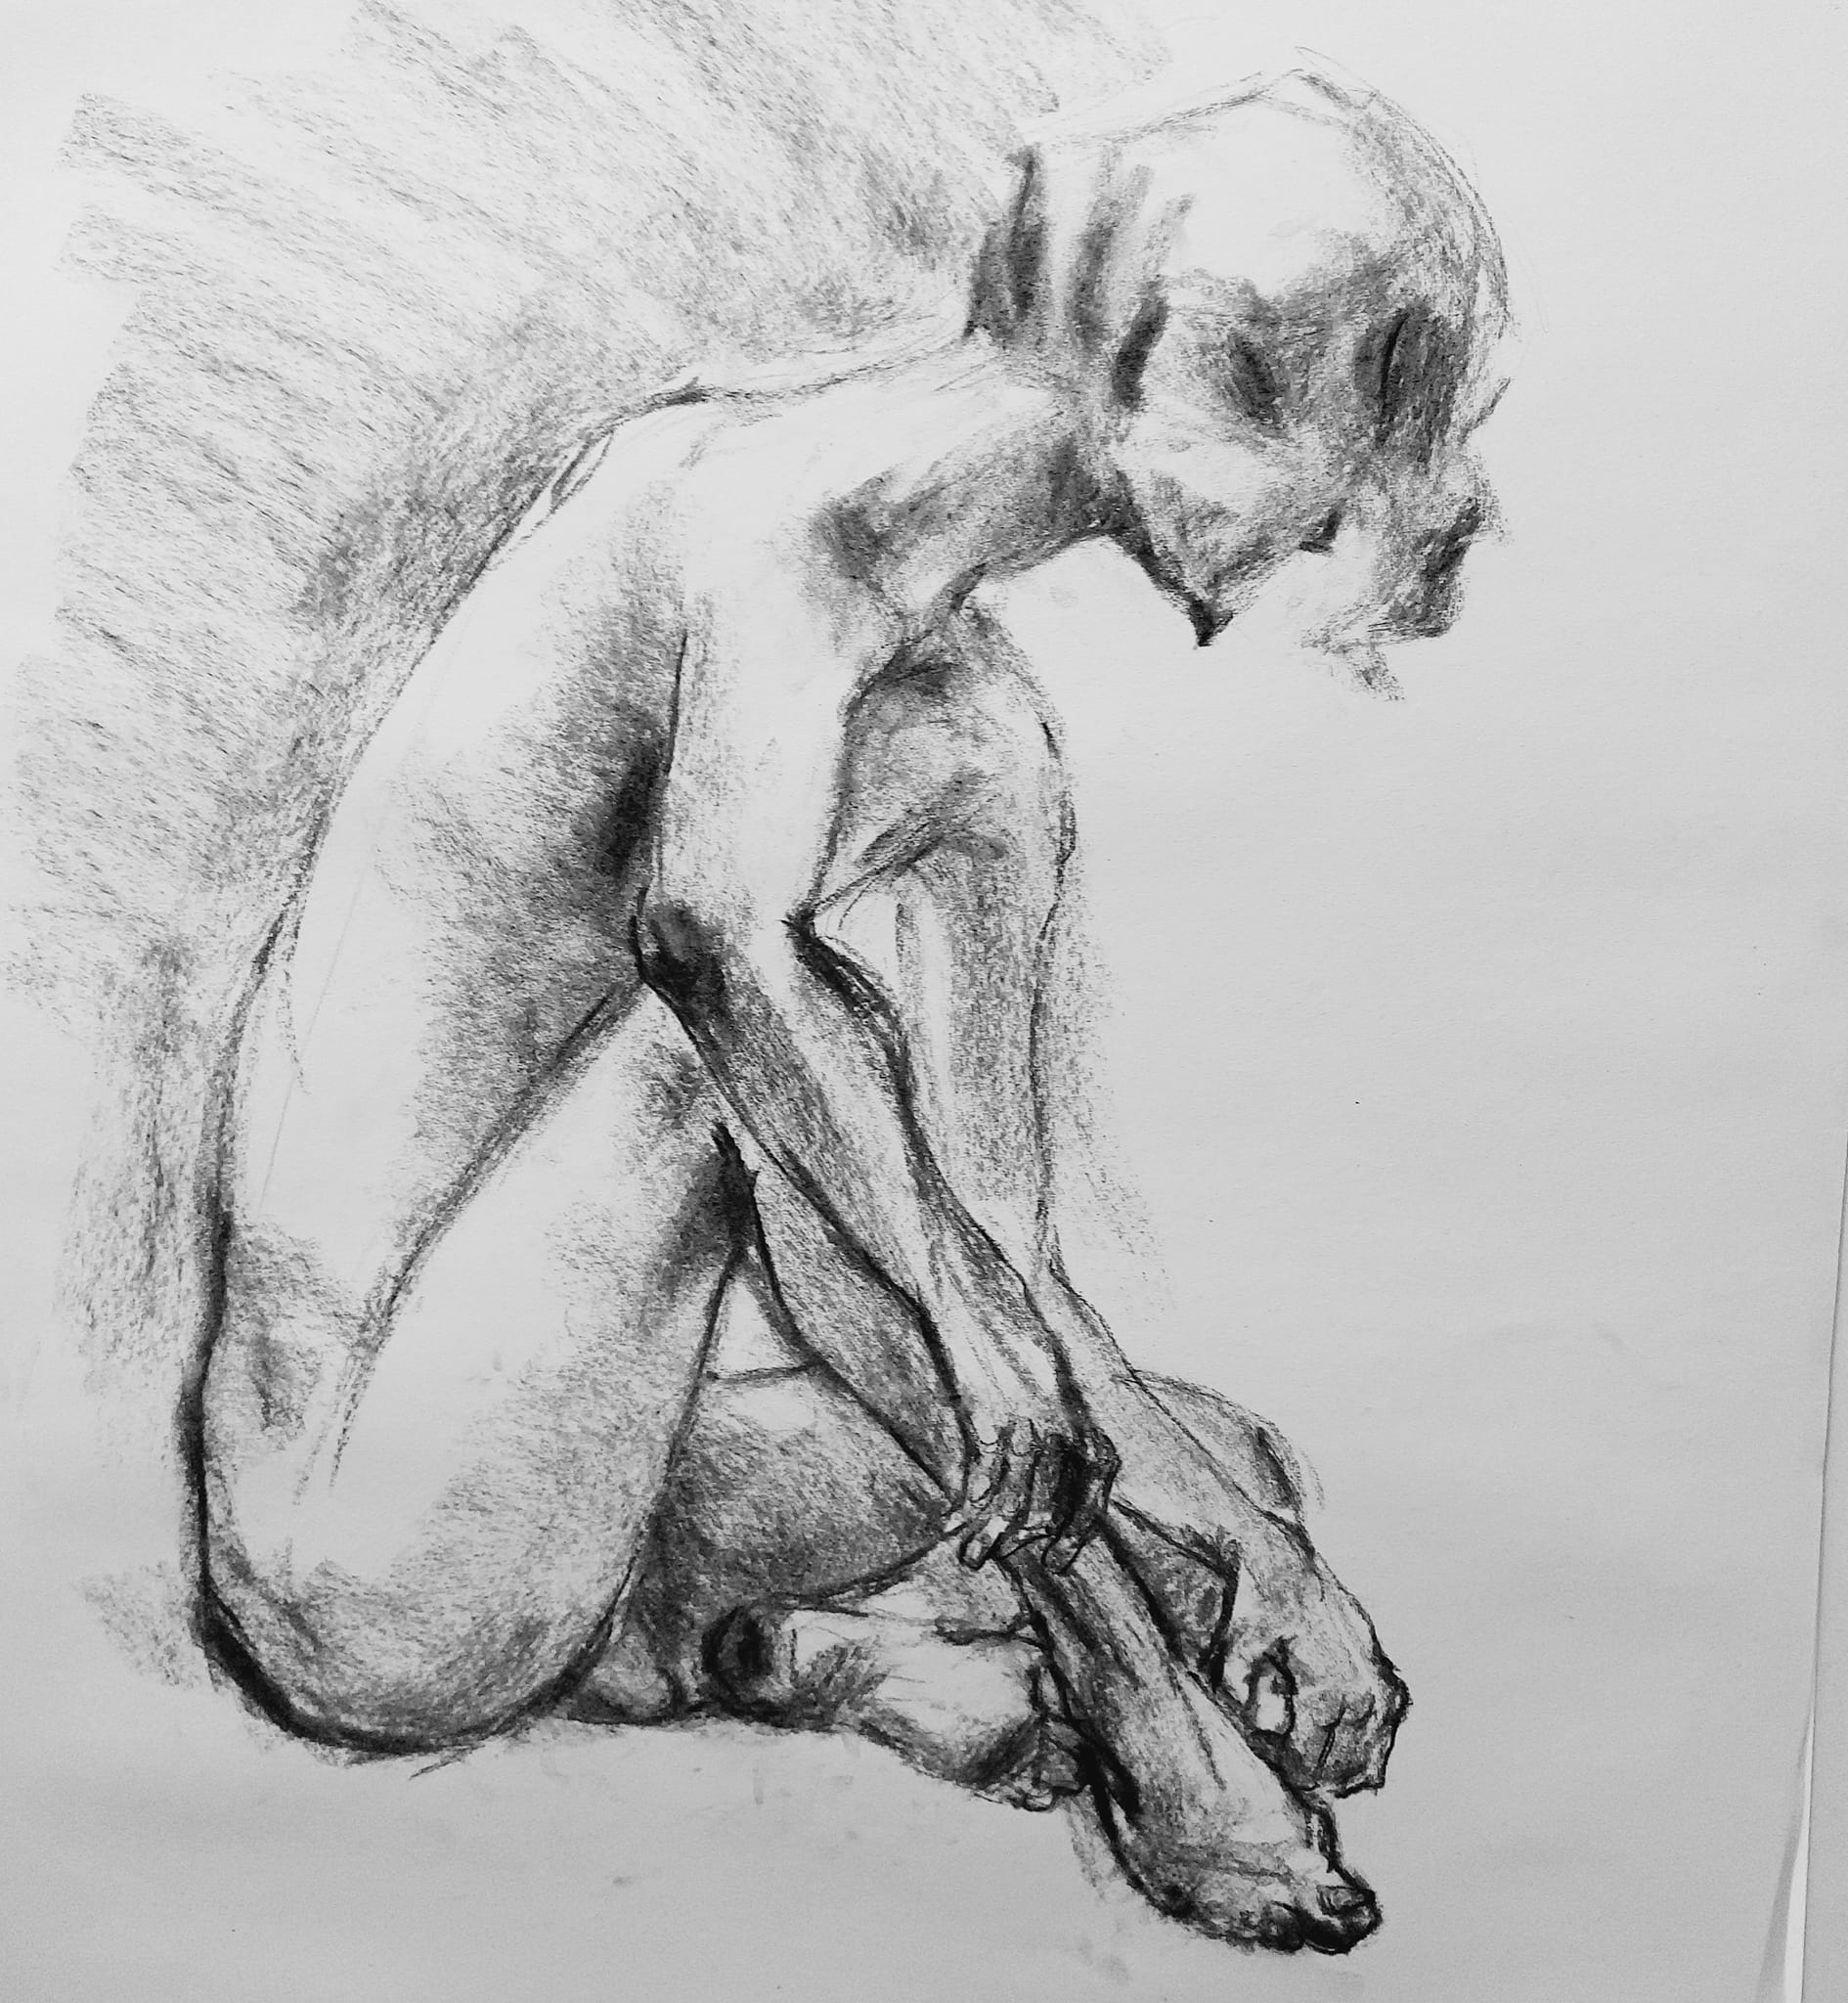 Kimbal. 10-minute study in charcoal. A2